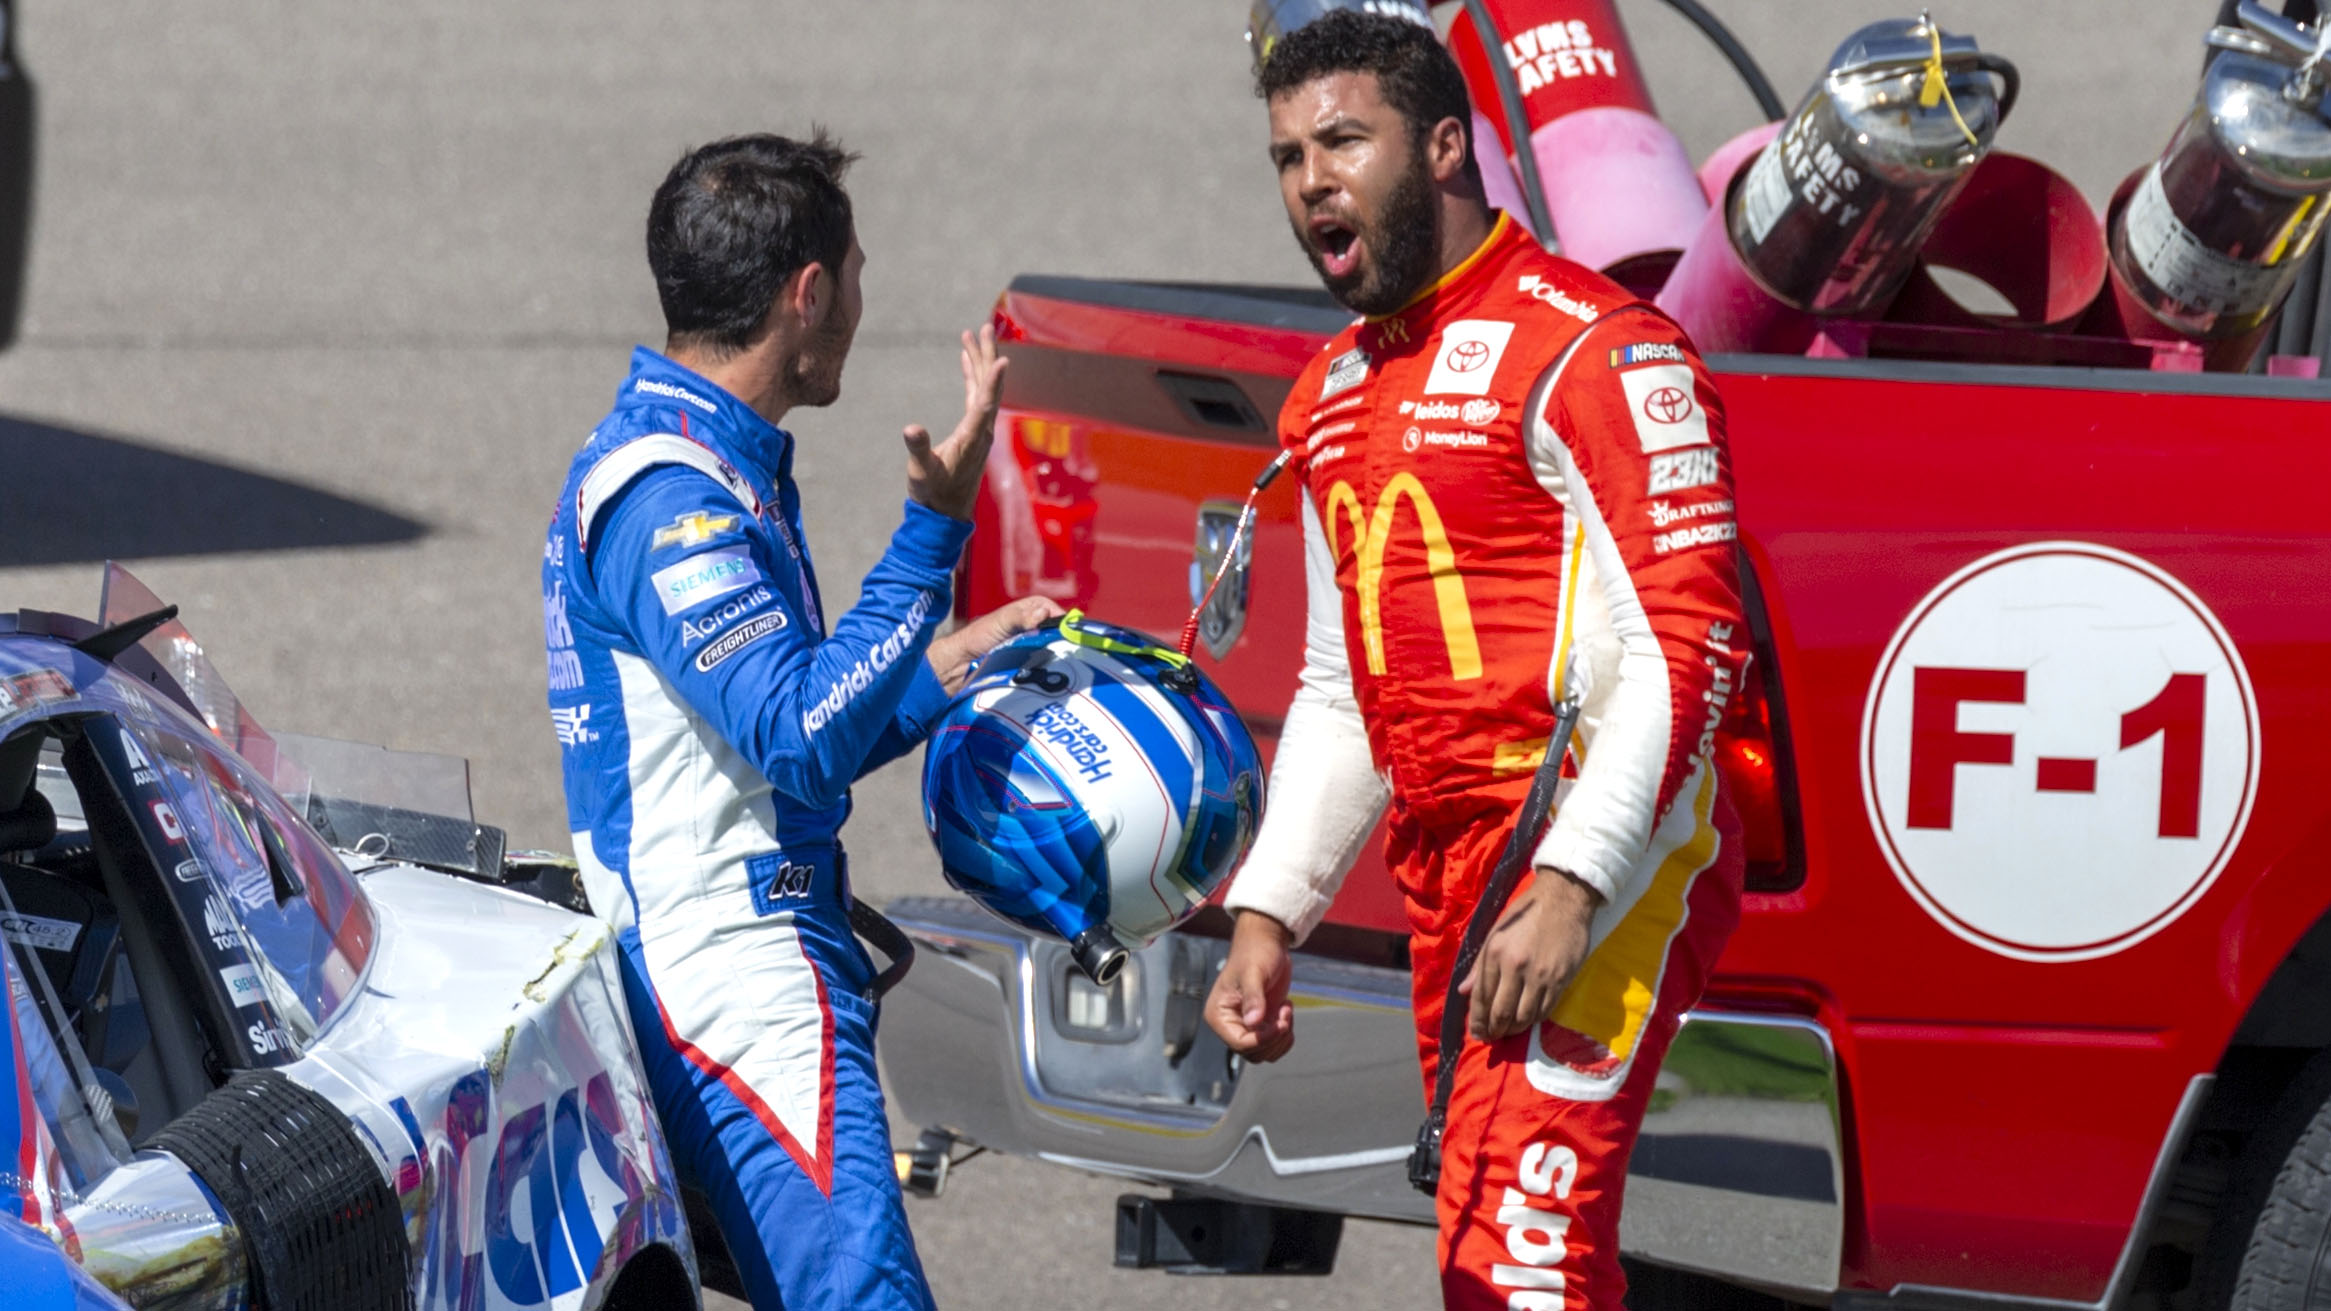 BREAKING: NASCAR Suspends Bubba Wallace For Crashing Into Driver And Then Attacking Him